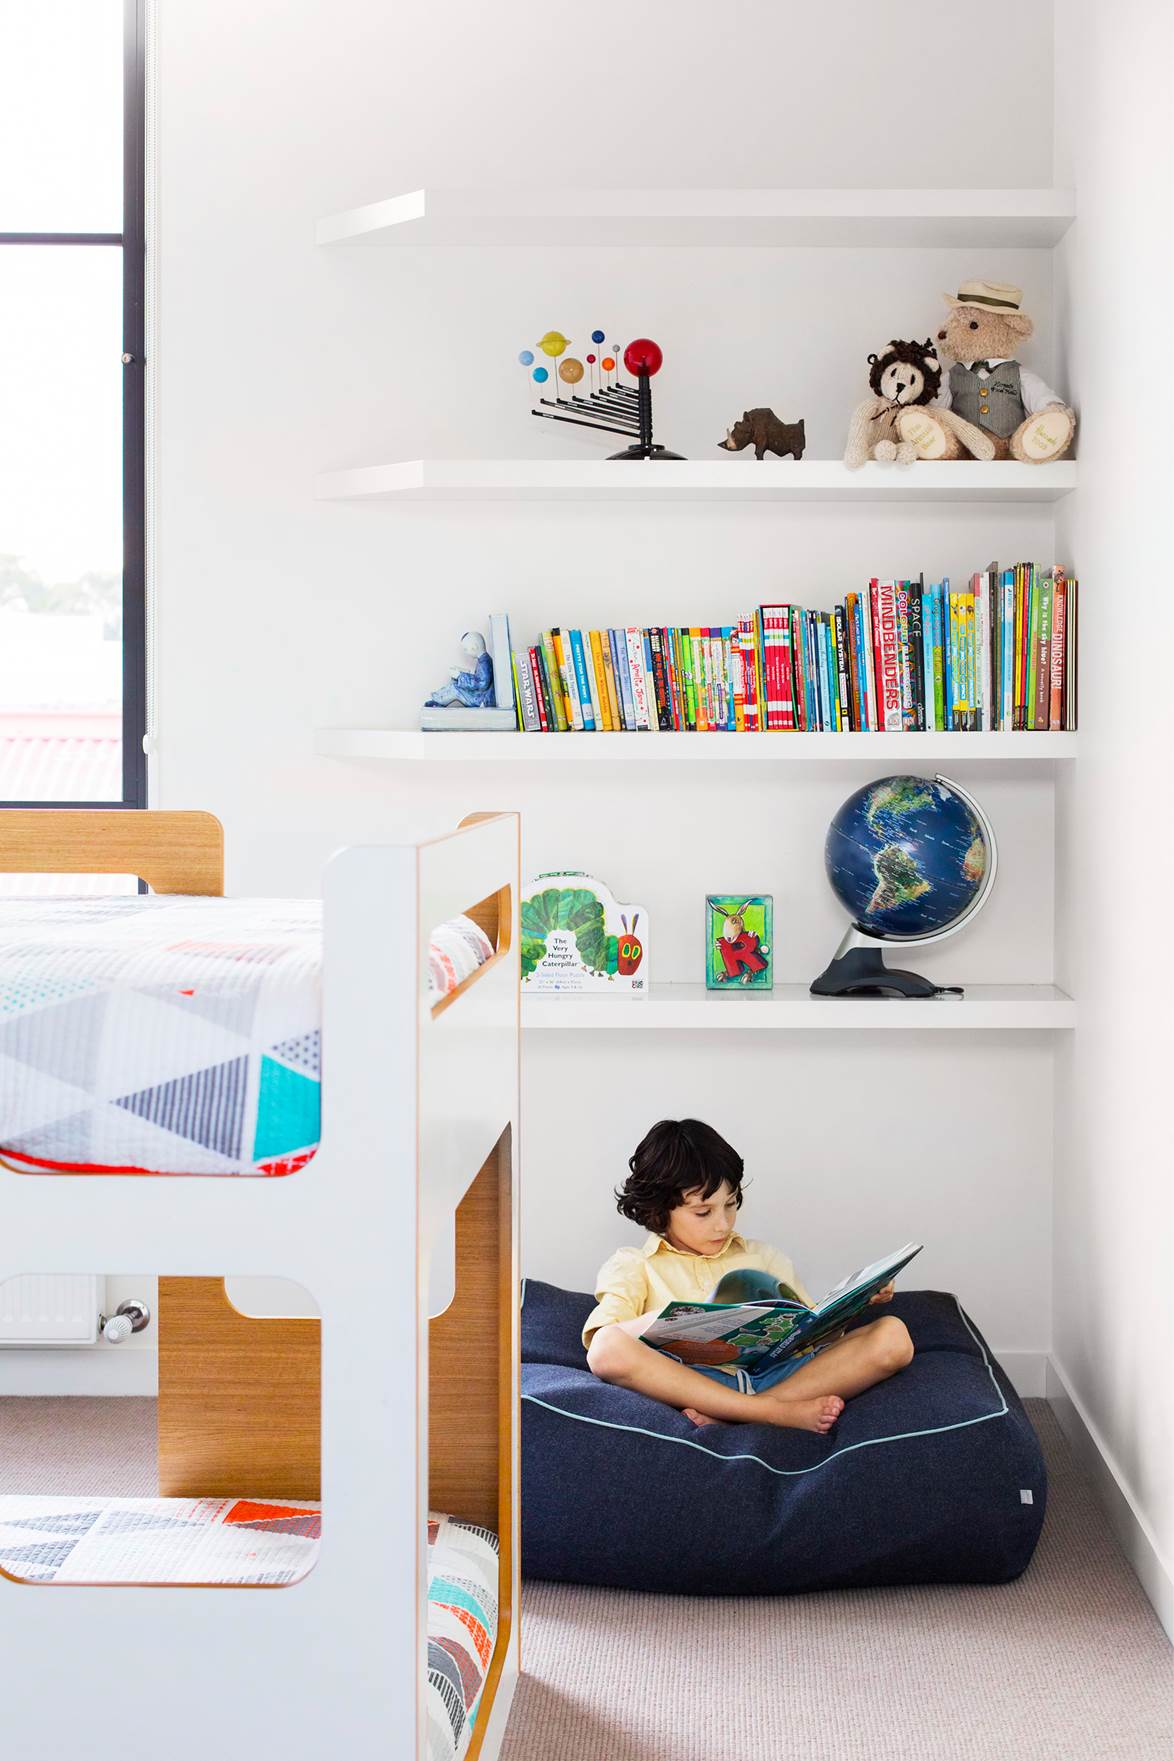 With three young children to accommodate in their chic house, comedian/radio host Dave Hughes and wife Holly Ife prioritized space and an open layout that could meet the family's needs as it evolved. The low-set bunk bed from Domayne in the children's bedroom provides safe and practical sleeping zones.